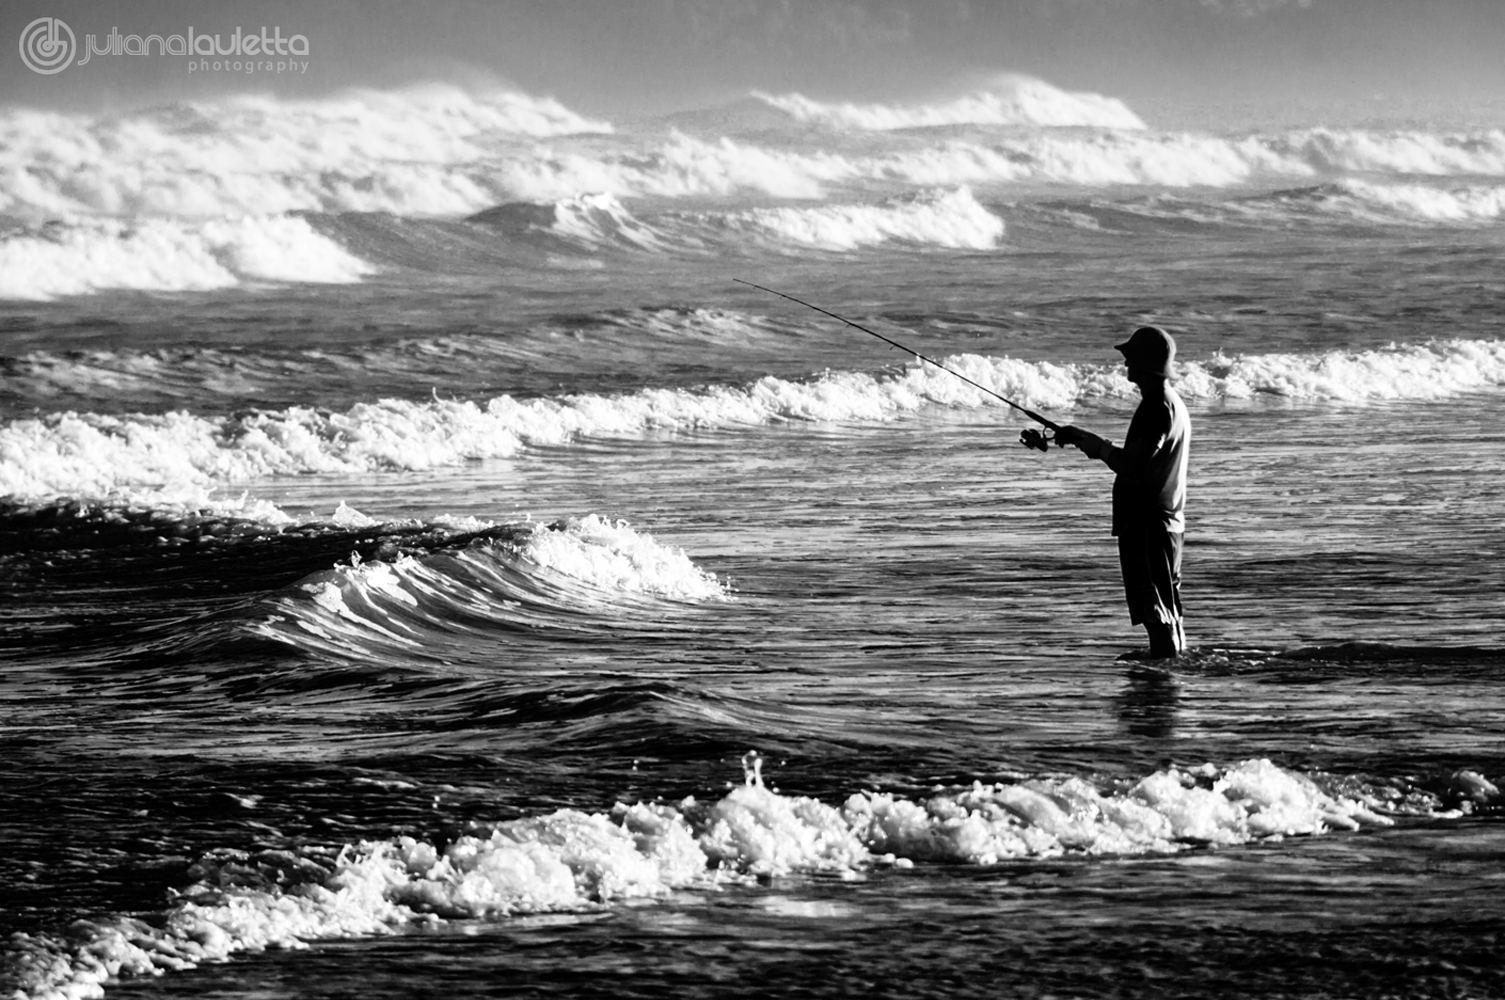 Juliana Lauletta - In Silhouette - Young Man And The Sea.jpg